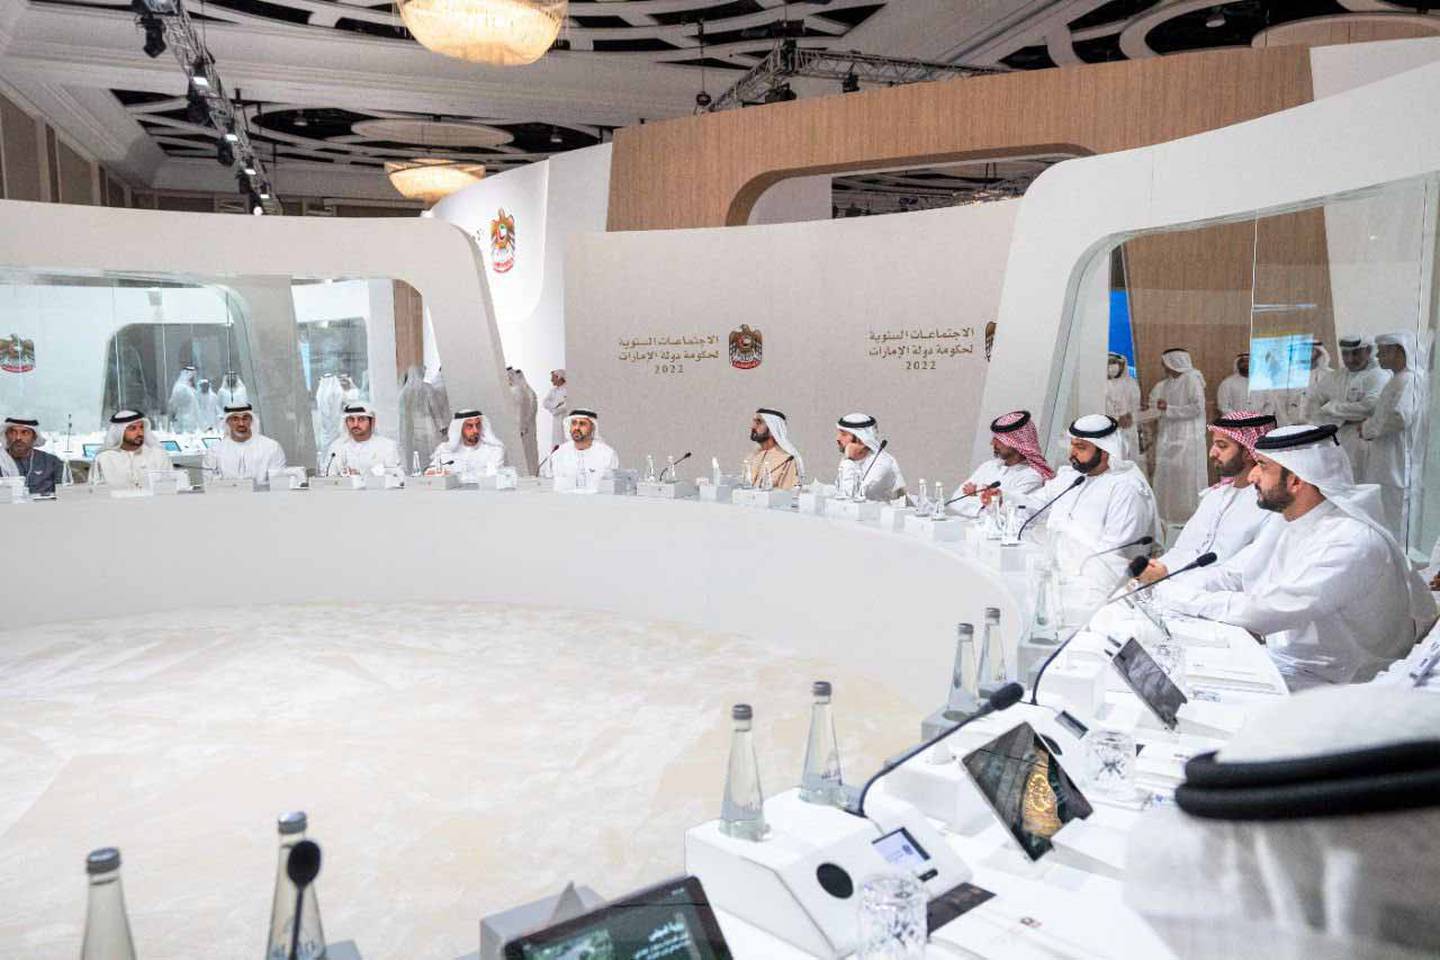 The meetings brought together government entities at federal and local levels to discuss the challenges, strategies and initiatives that will lead the country on the path to achieve the Centennial 2071 Plan. Photo: @HHShkMohd / Twitter